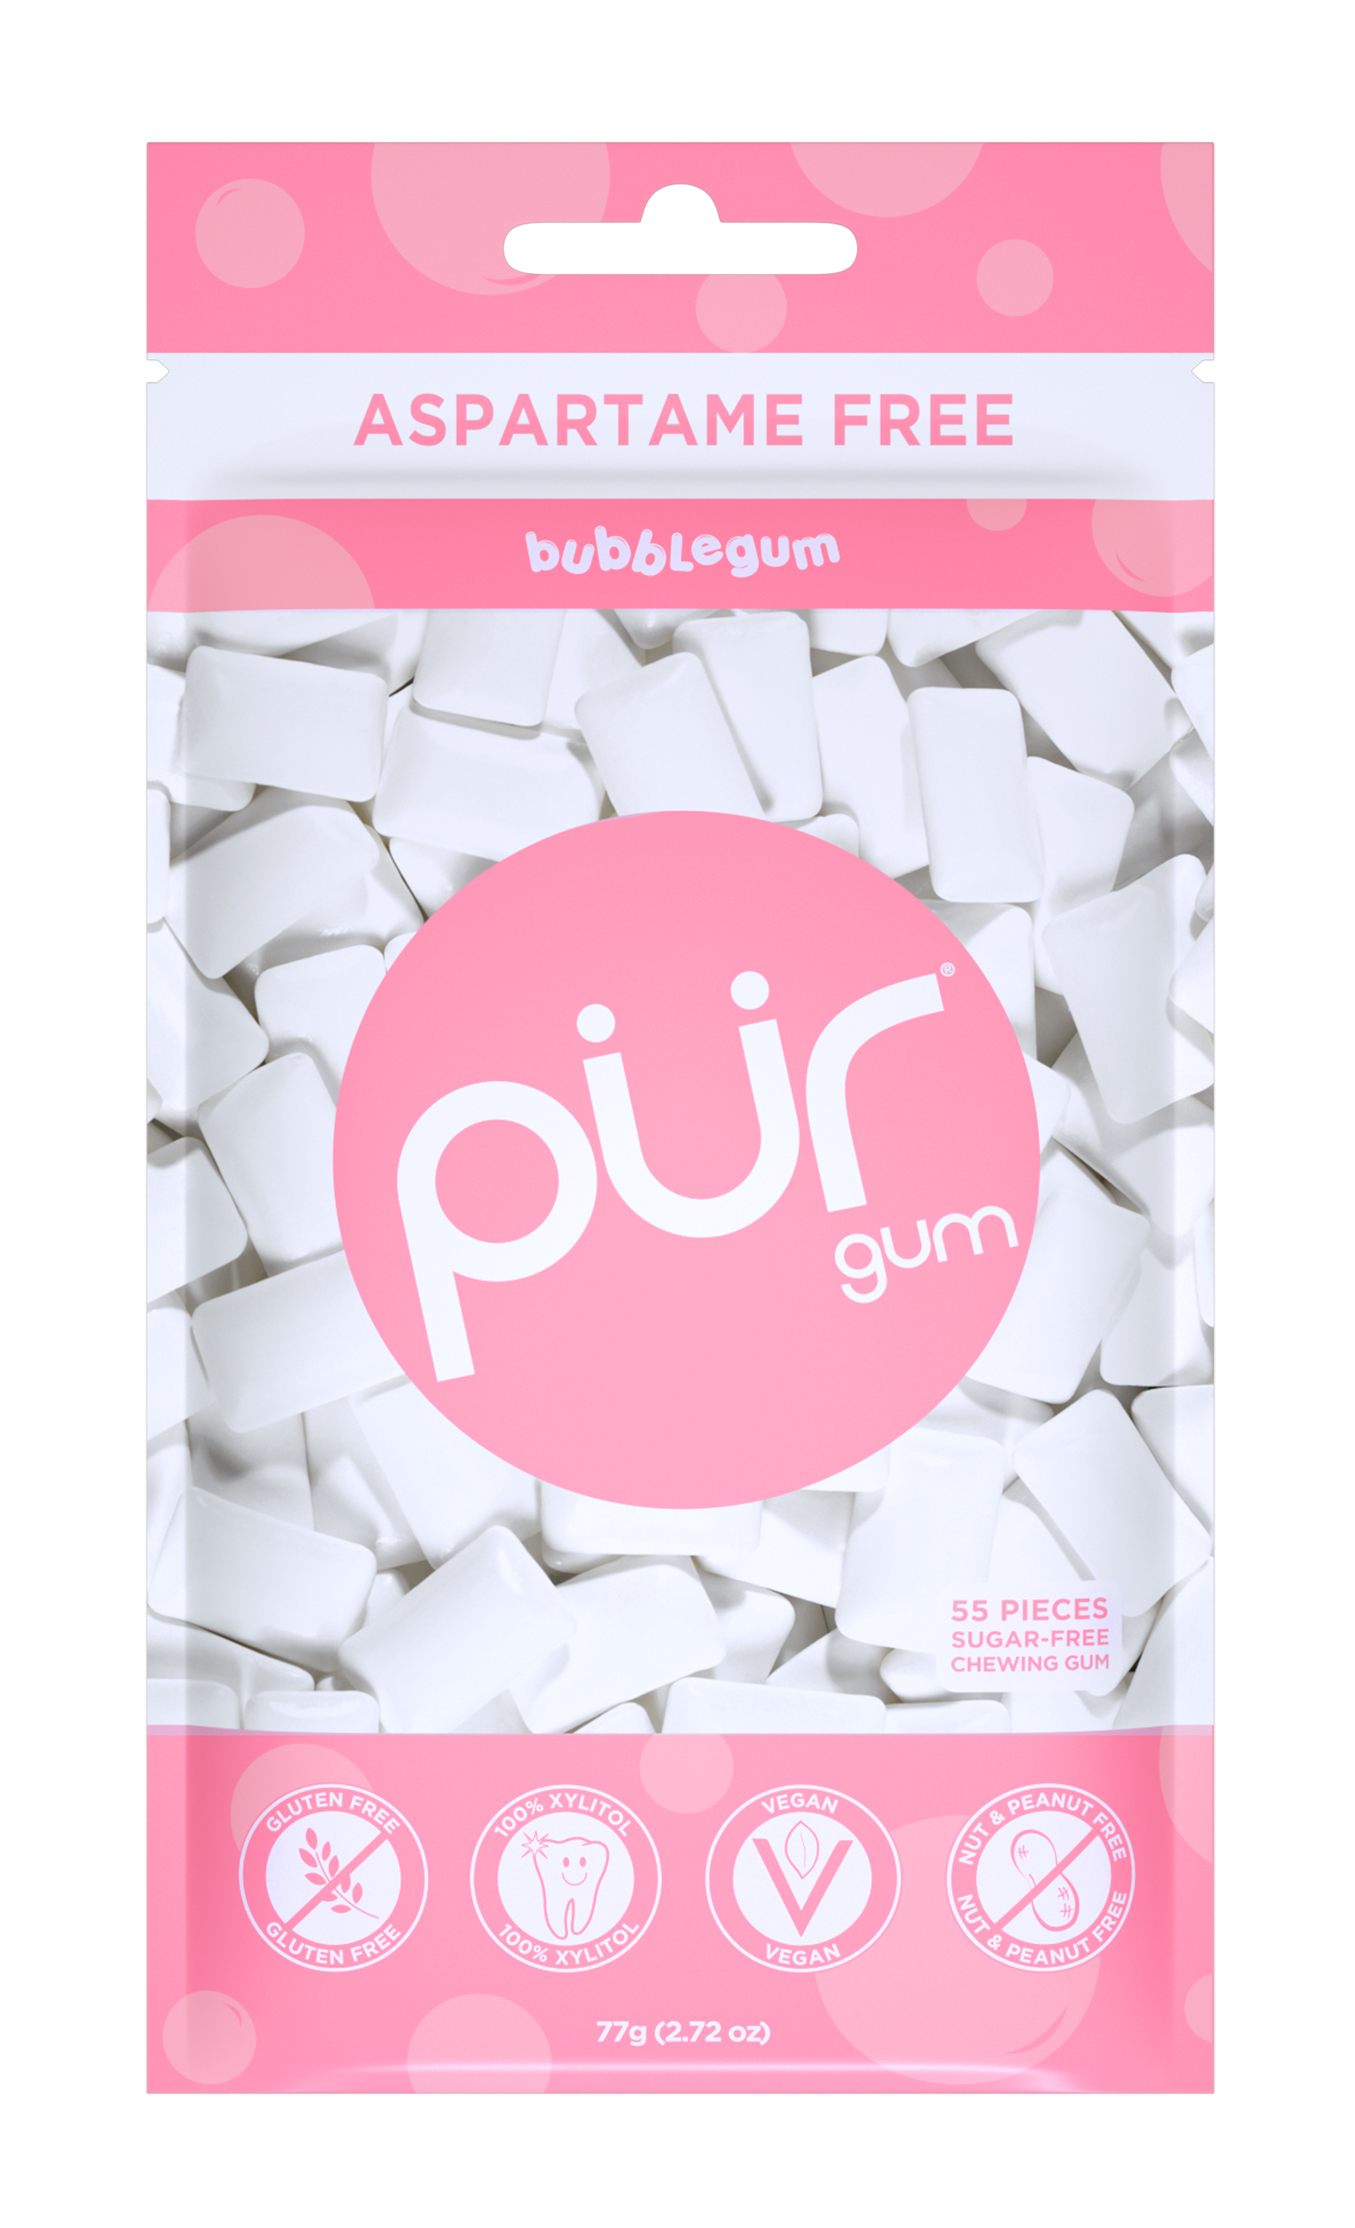 The PUR Company PUR Gum Peppermint Pack (9 count) – Smallflower